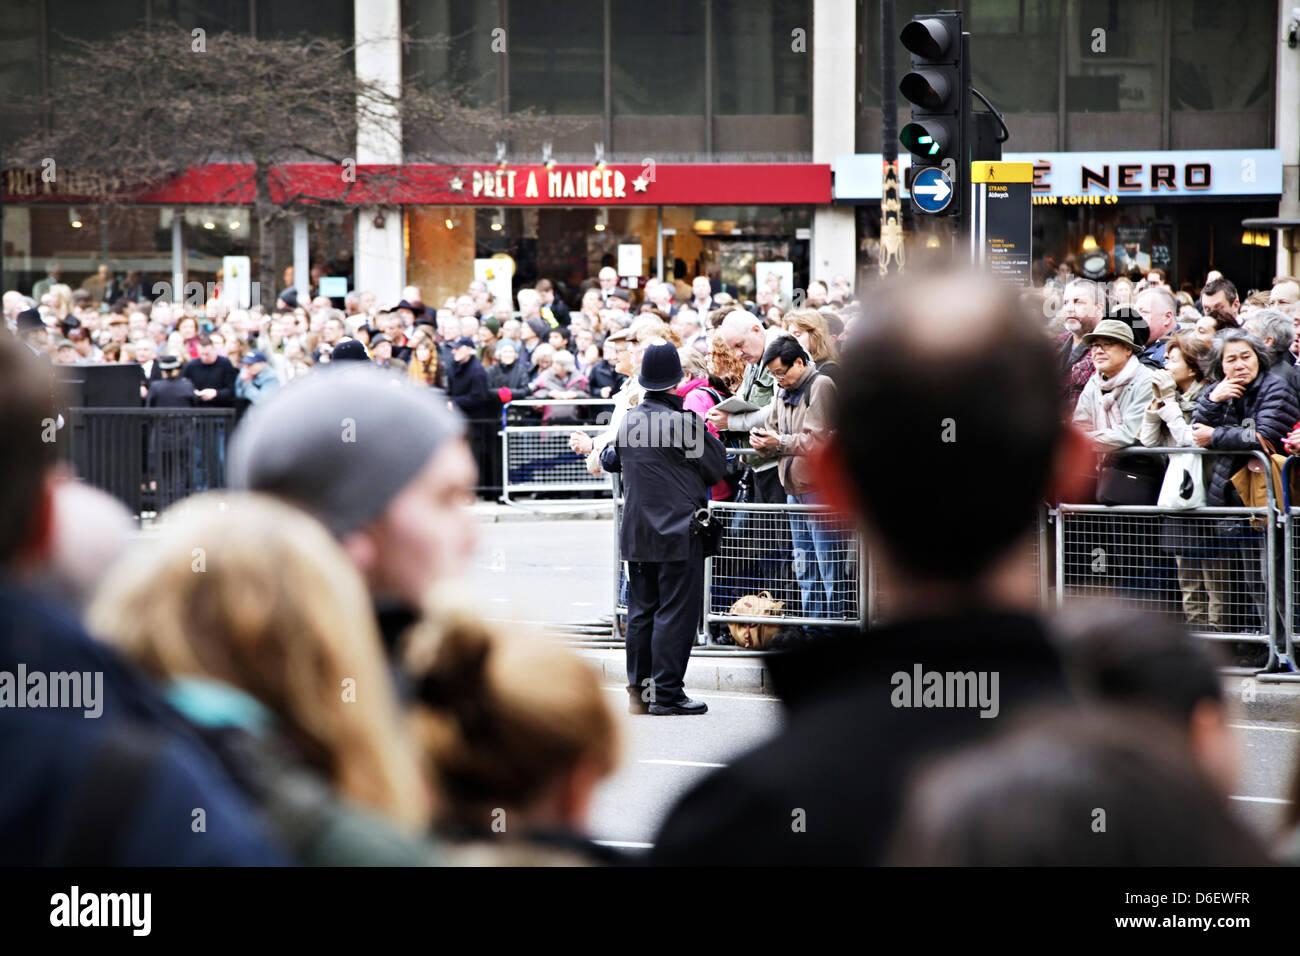 London, UK. 17th April 2013. Crowds gather for Baroness Thatcher's funeral. Credit: Ruaridh Papworth/Alamy Live News Stock Photo